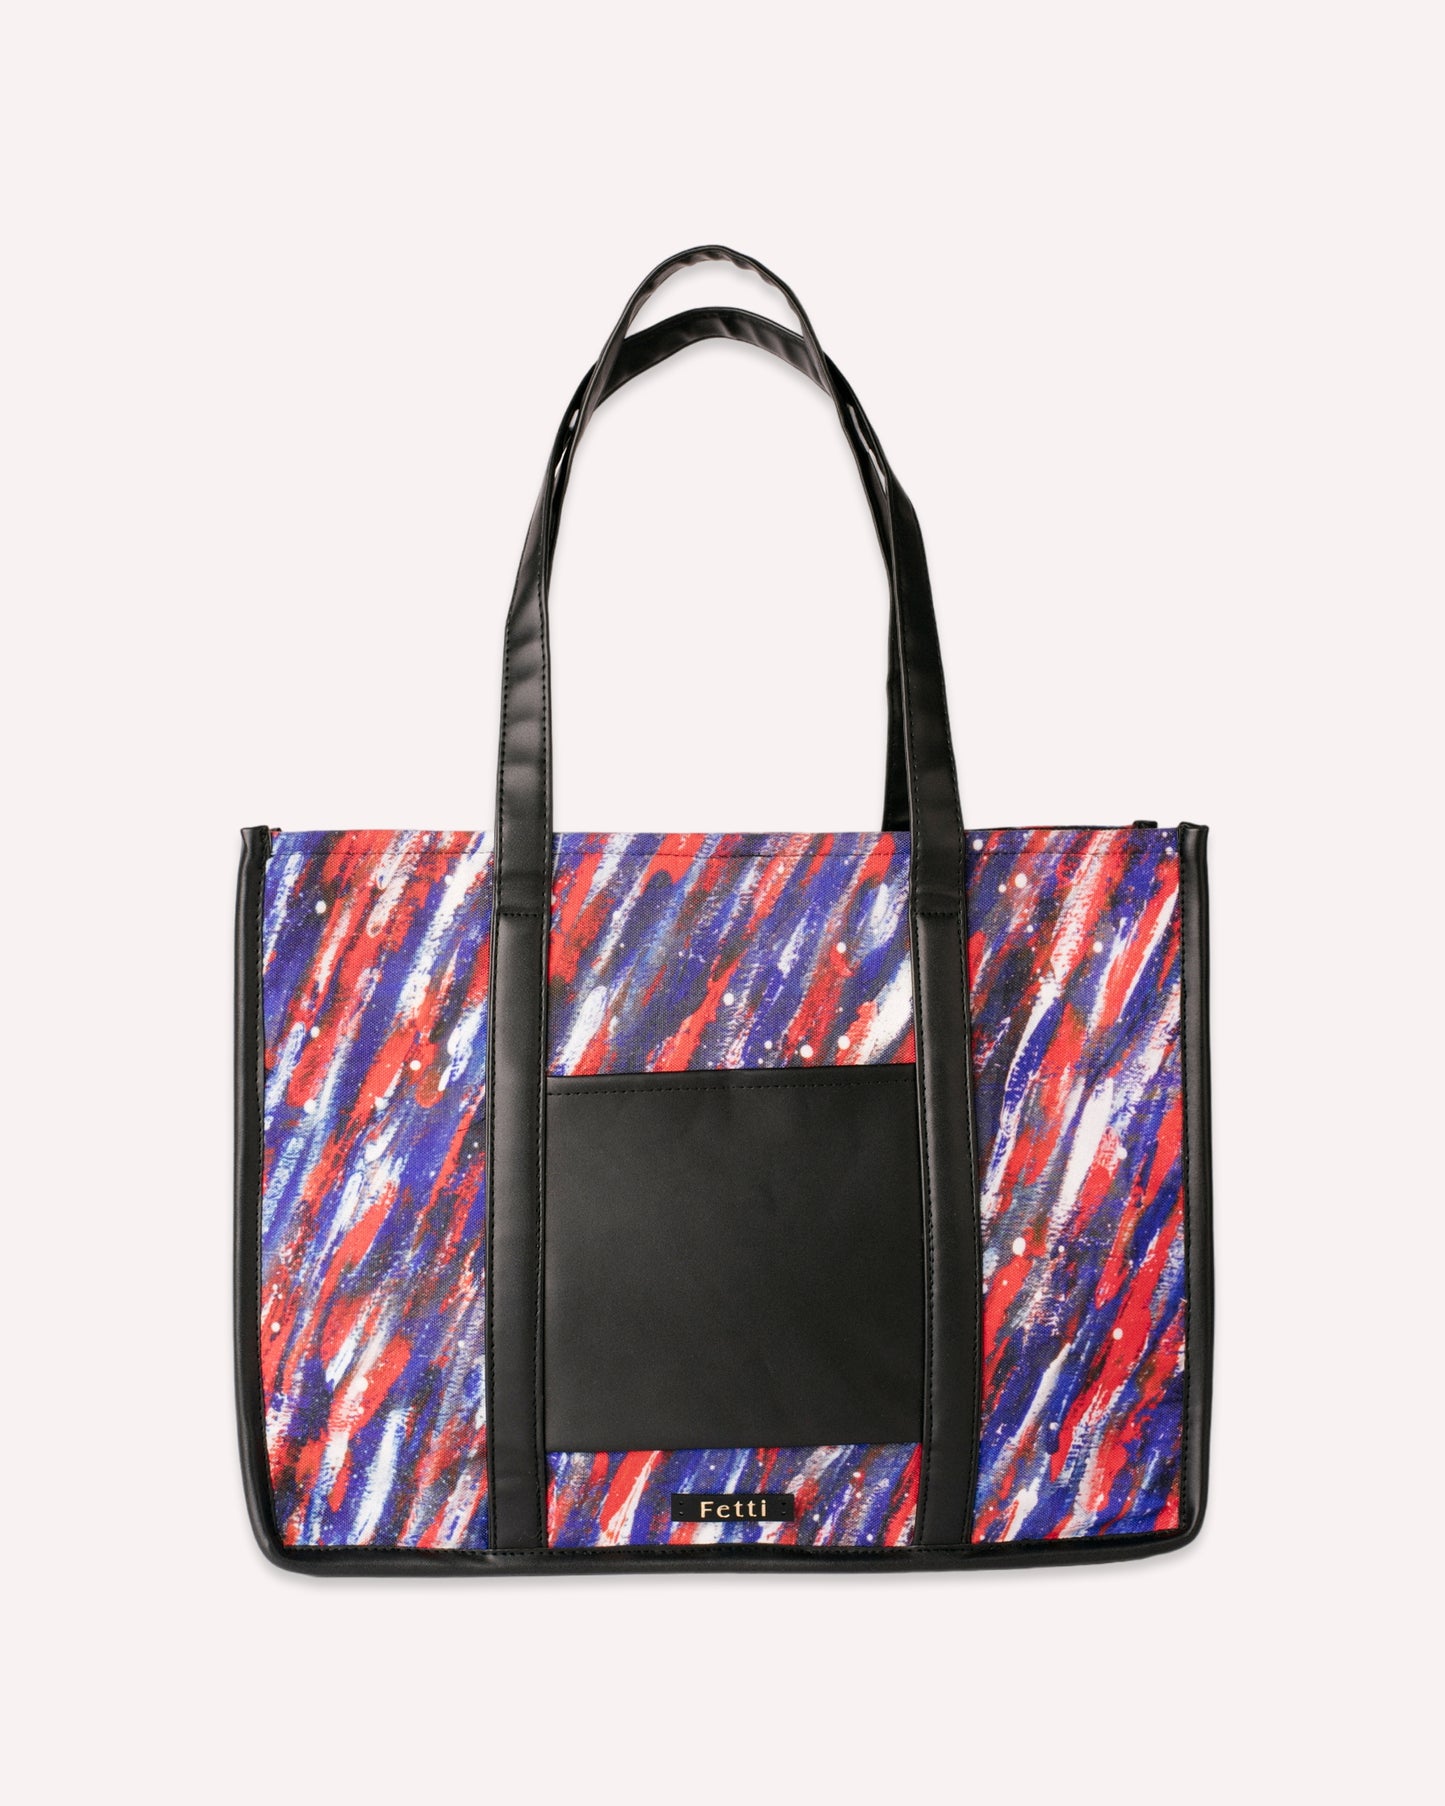 The Fetti Statement Office Tote Bag Red Strokes